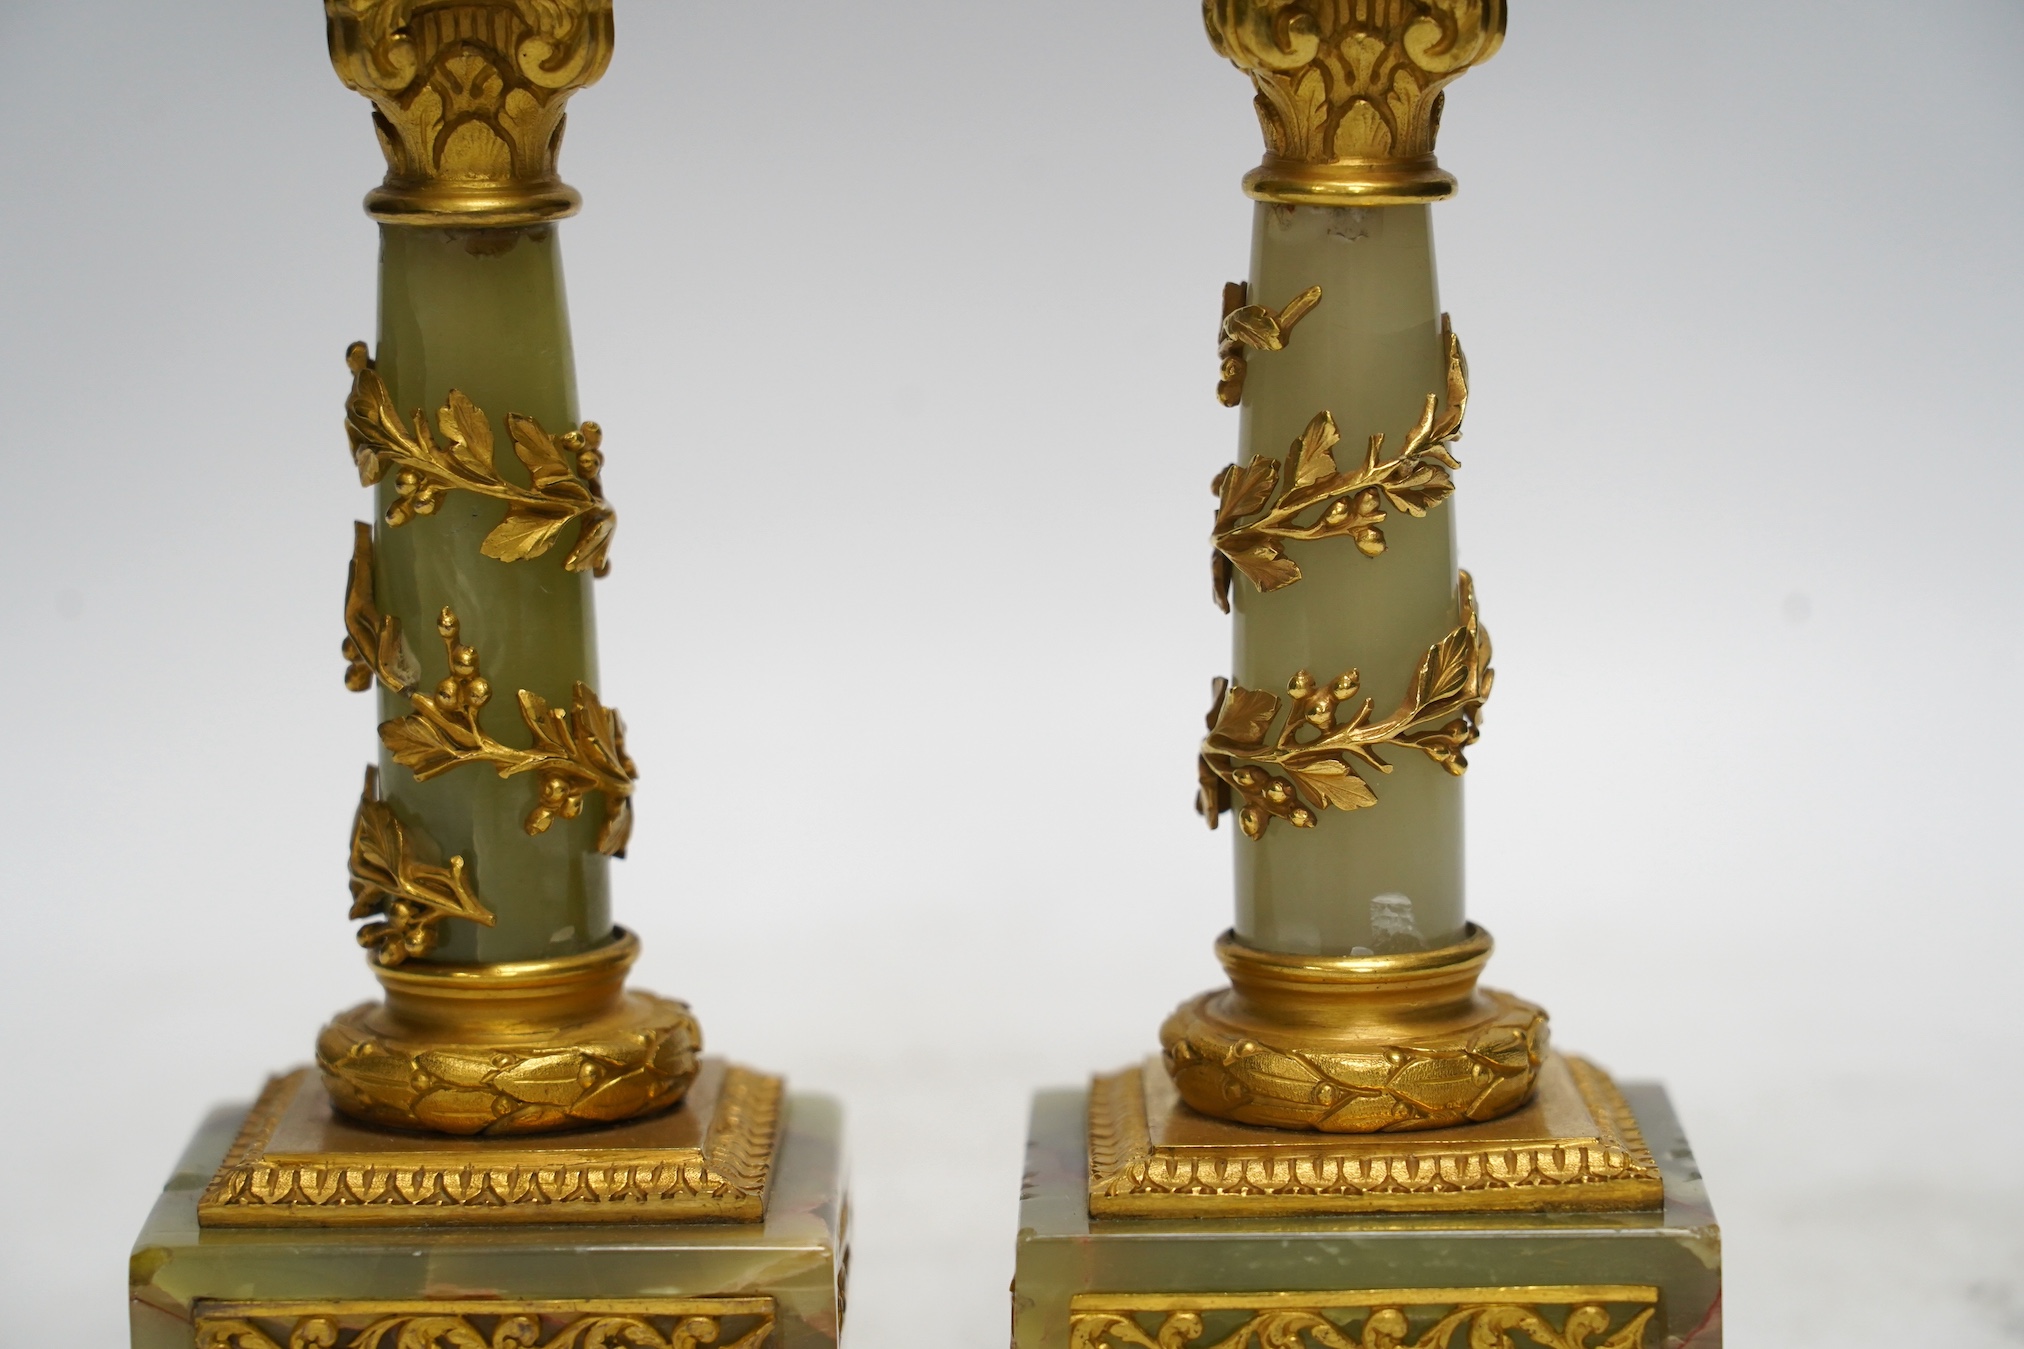 A pair of early 20th century French ormolu mounted onyx candlesticks, 20cm high